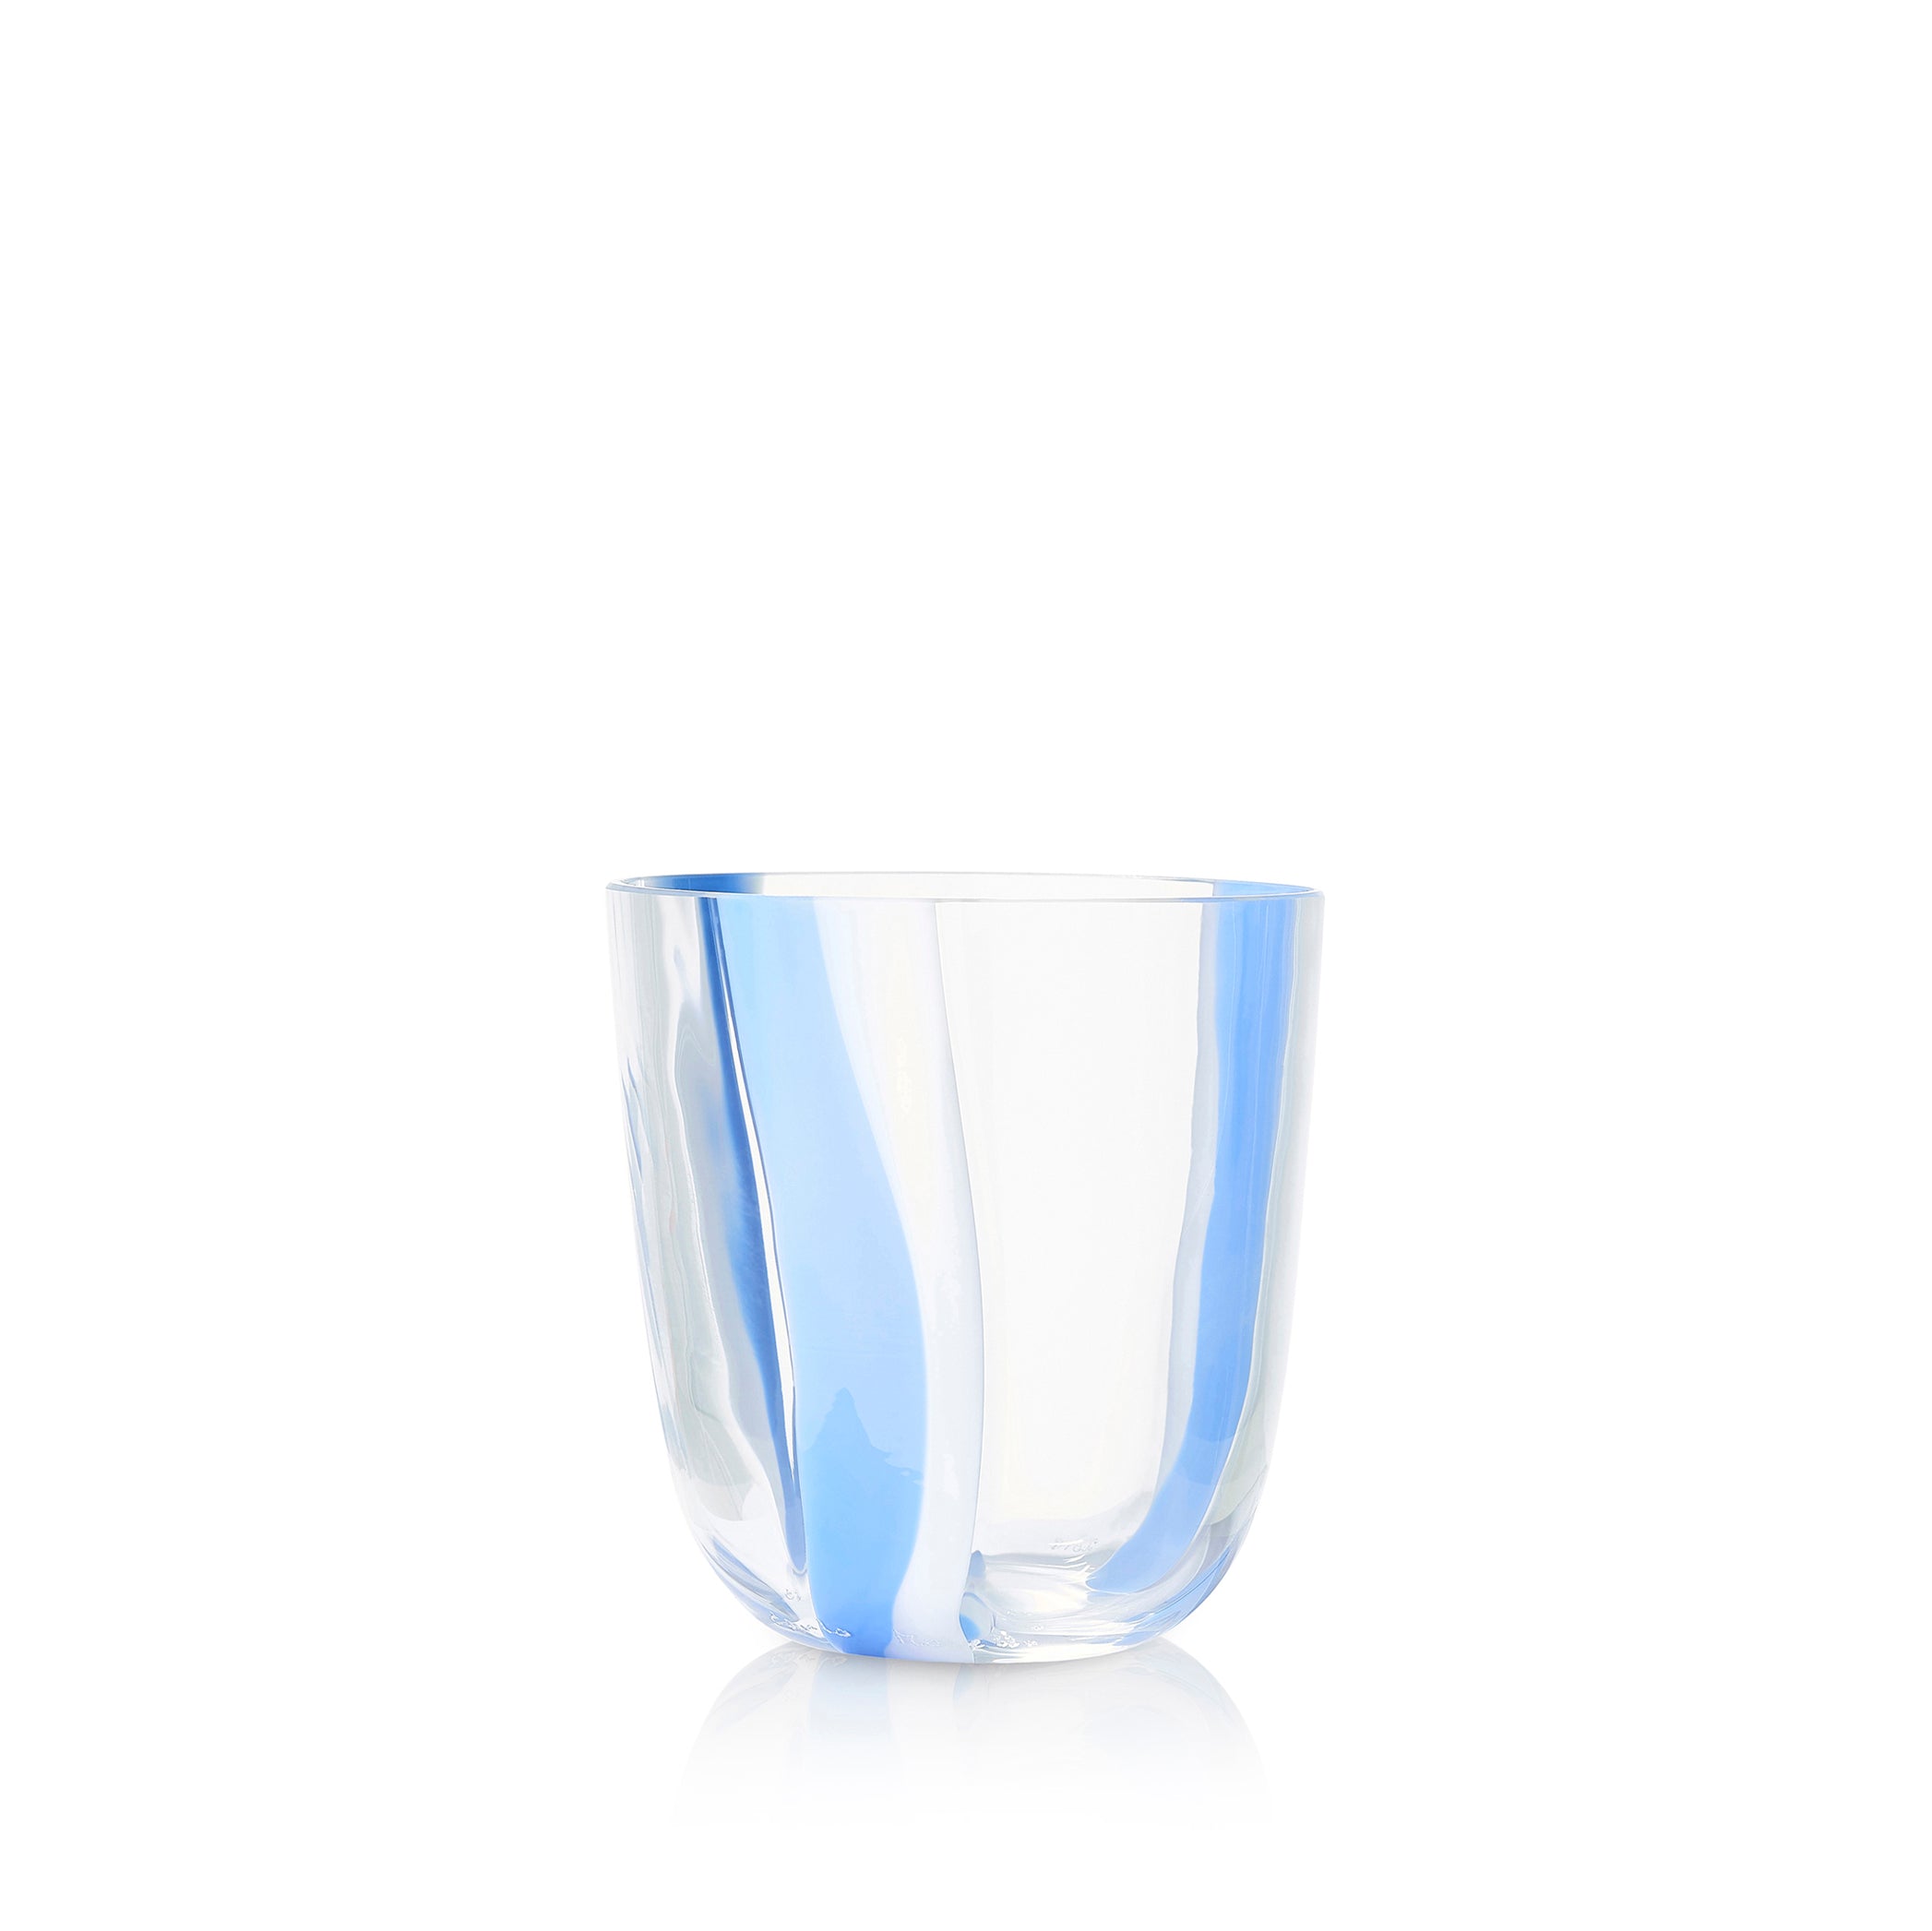 Set of Two Handblown Stripe Glass Tumblers in Turquoise Blue & White, 8.5cm